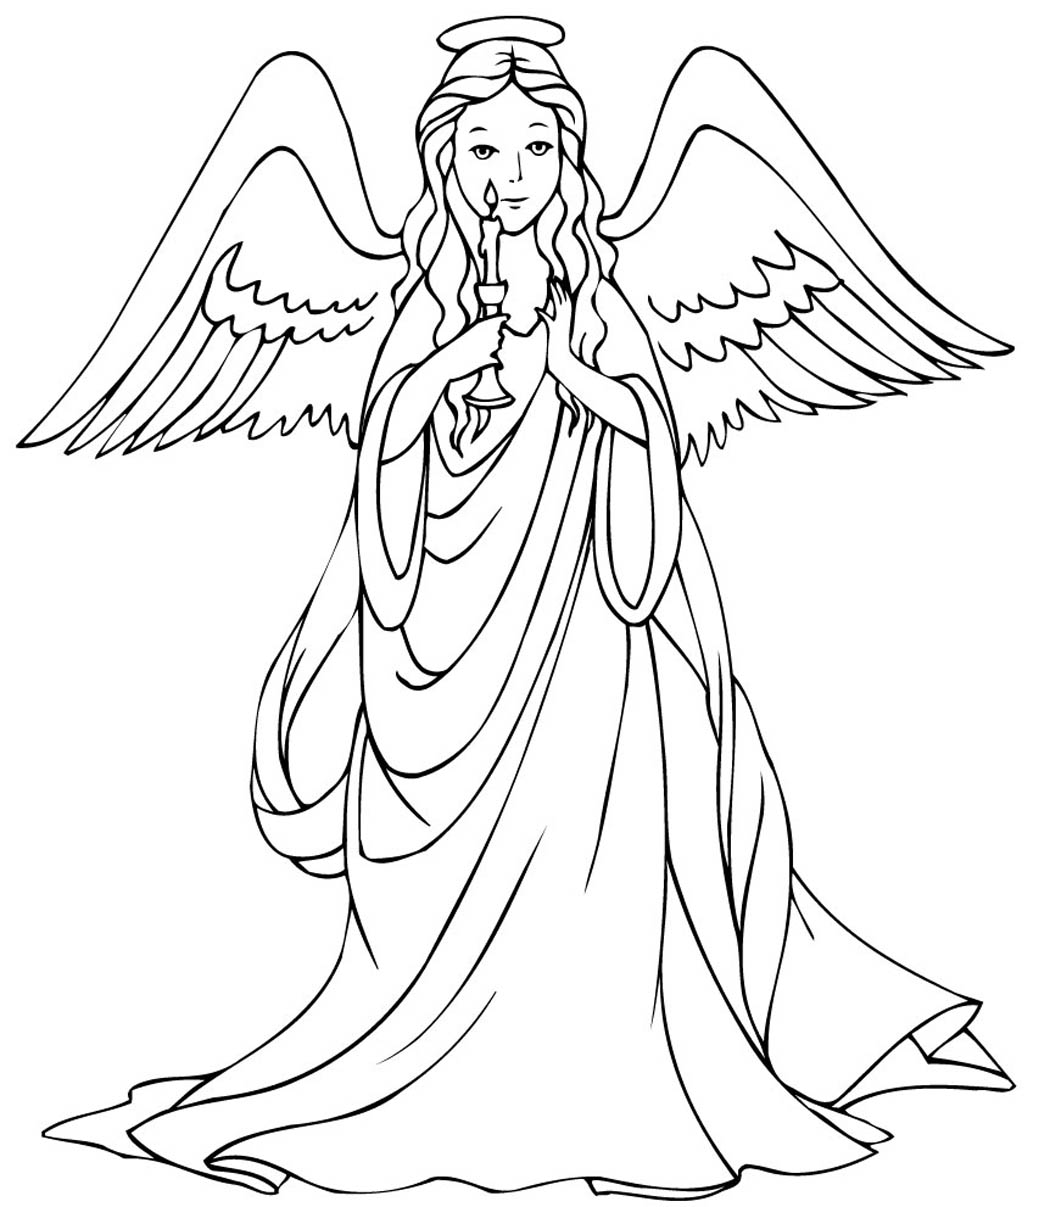 Printable Angel Coloring Pages | Coloringme.com